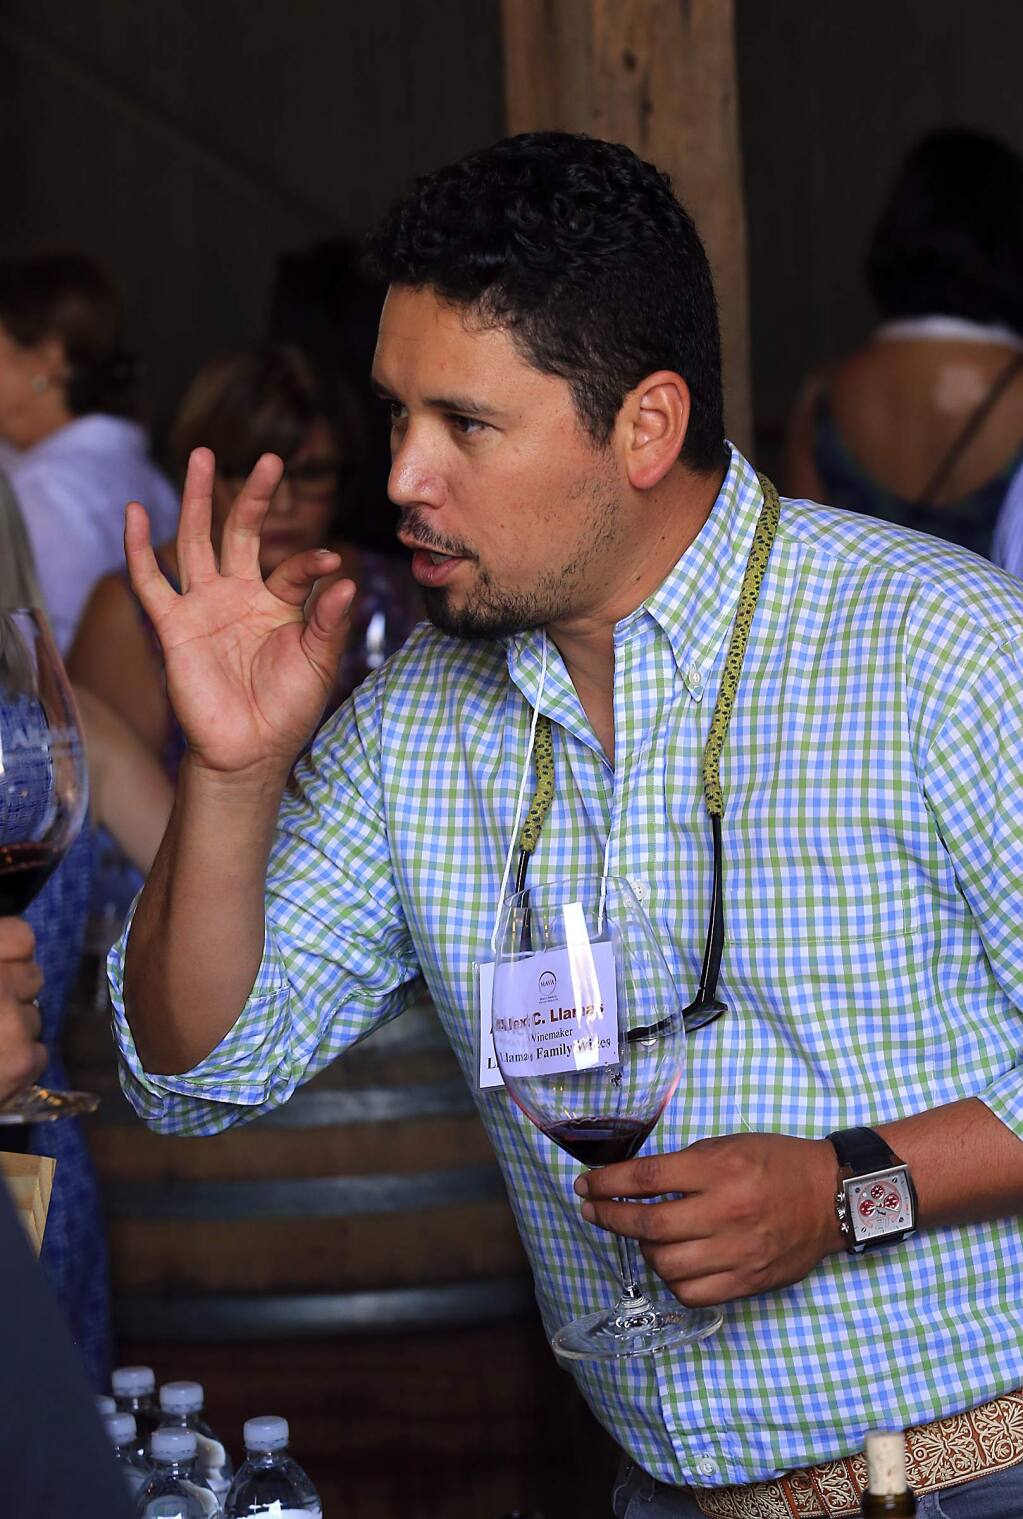 Winemaker Alex Llamas pours his Llamas Family Wines at the Mexican-American Vintners Association 6th Annual Harvest Festival at Robledo Family Winery in Sonoma. (JOHN BURGESS/The Press Democrat)